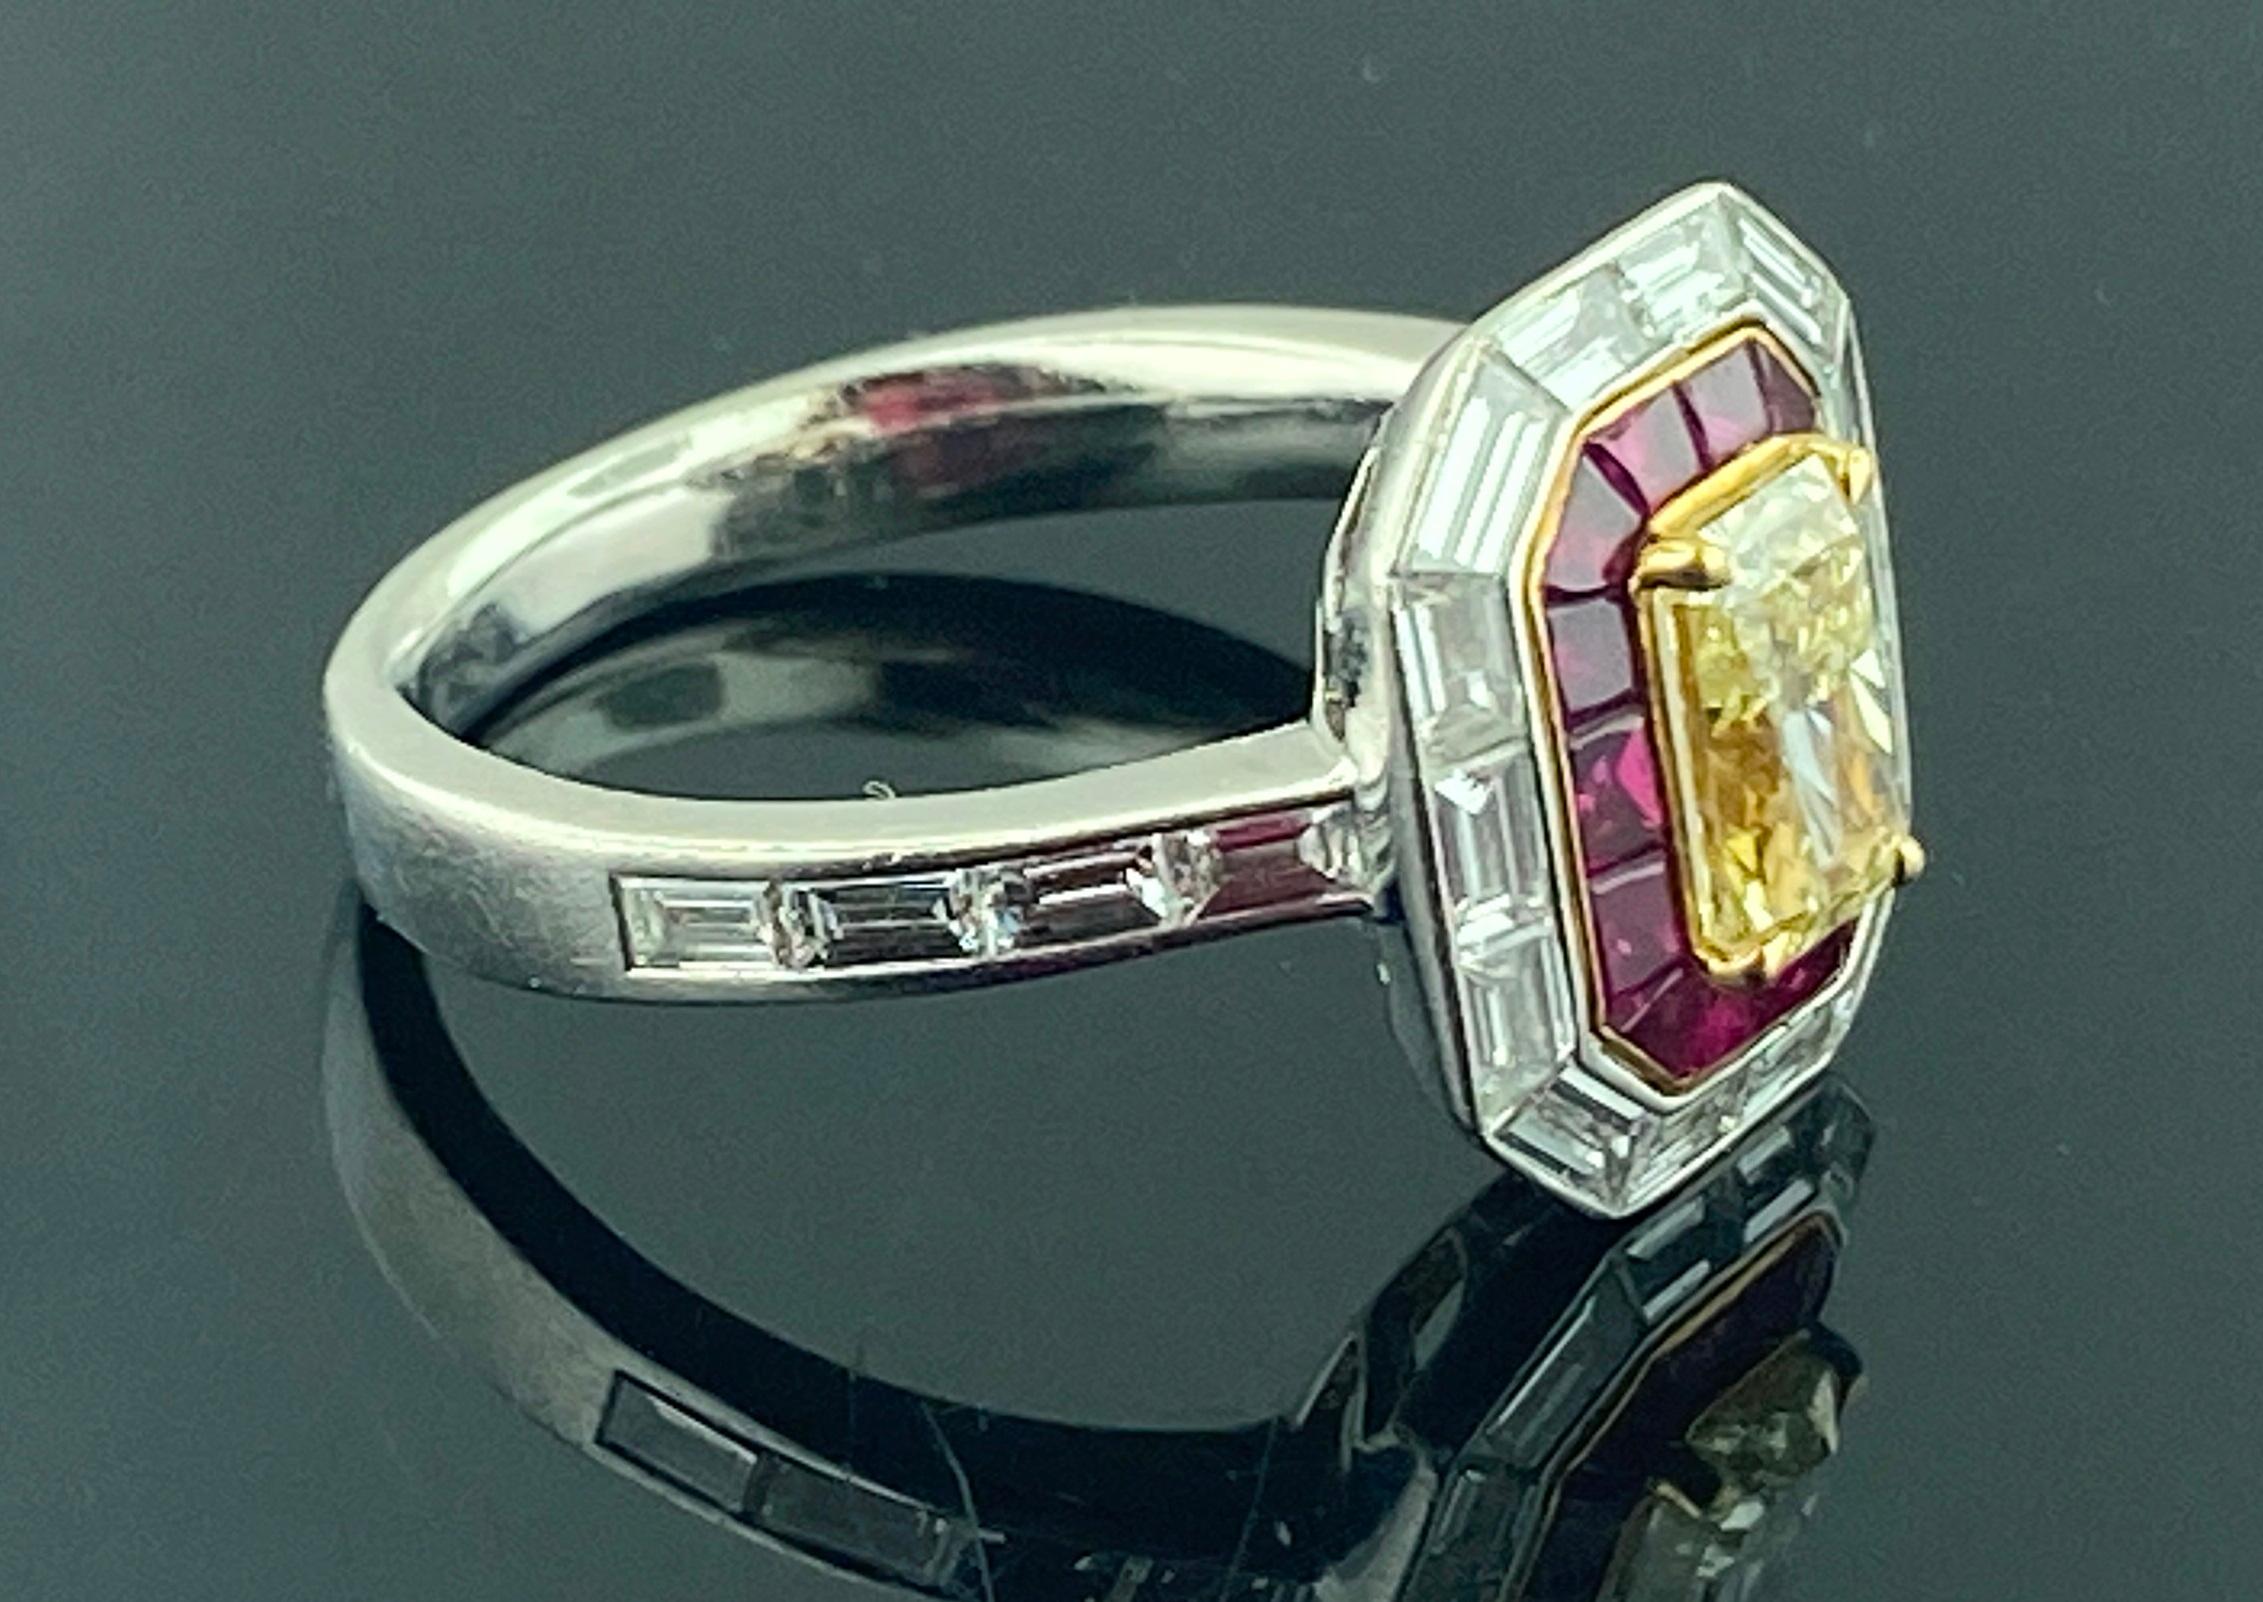 1.13 Ct Radiant Cut Diamond and Ruby Ring in Platinum In Excellent Condition For Sale In Palm Desert, CA